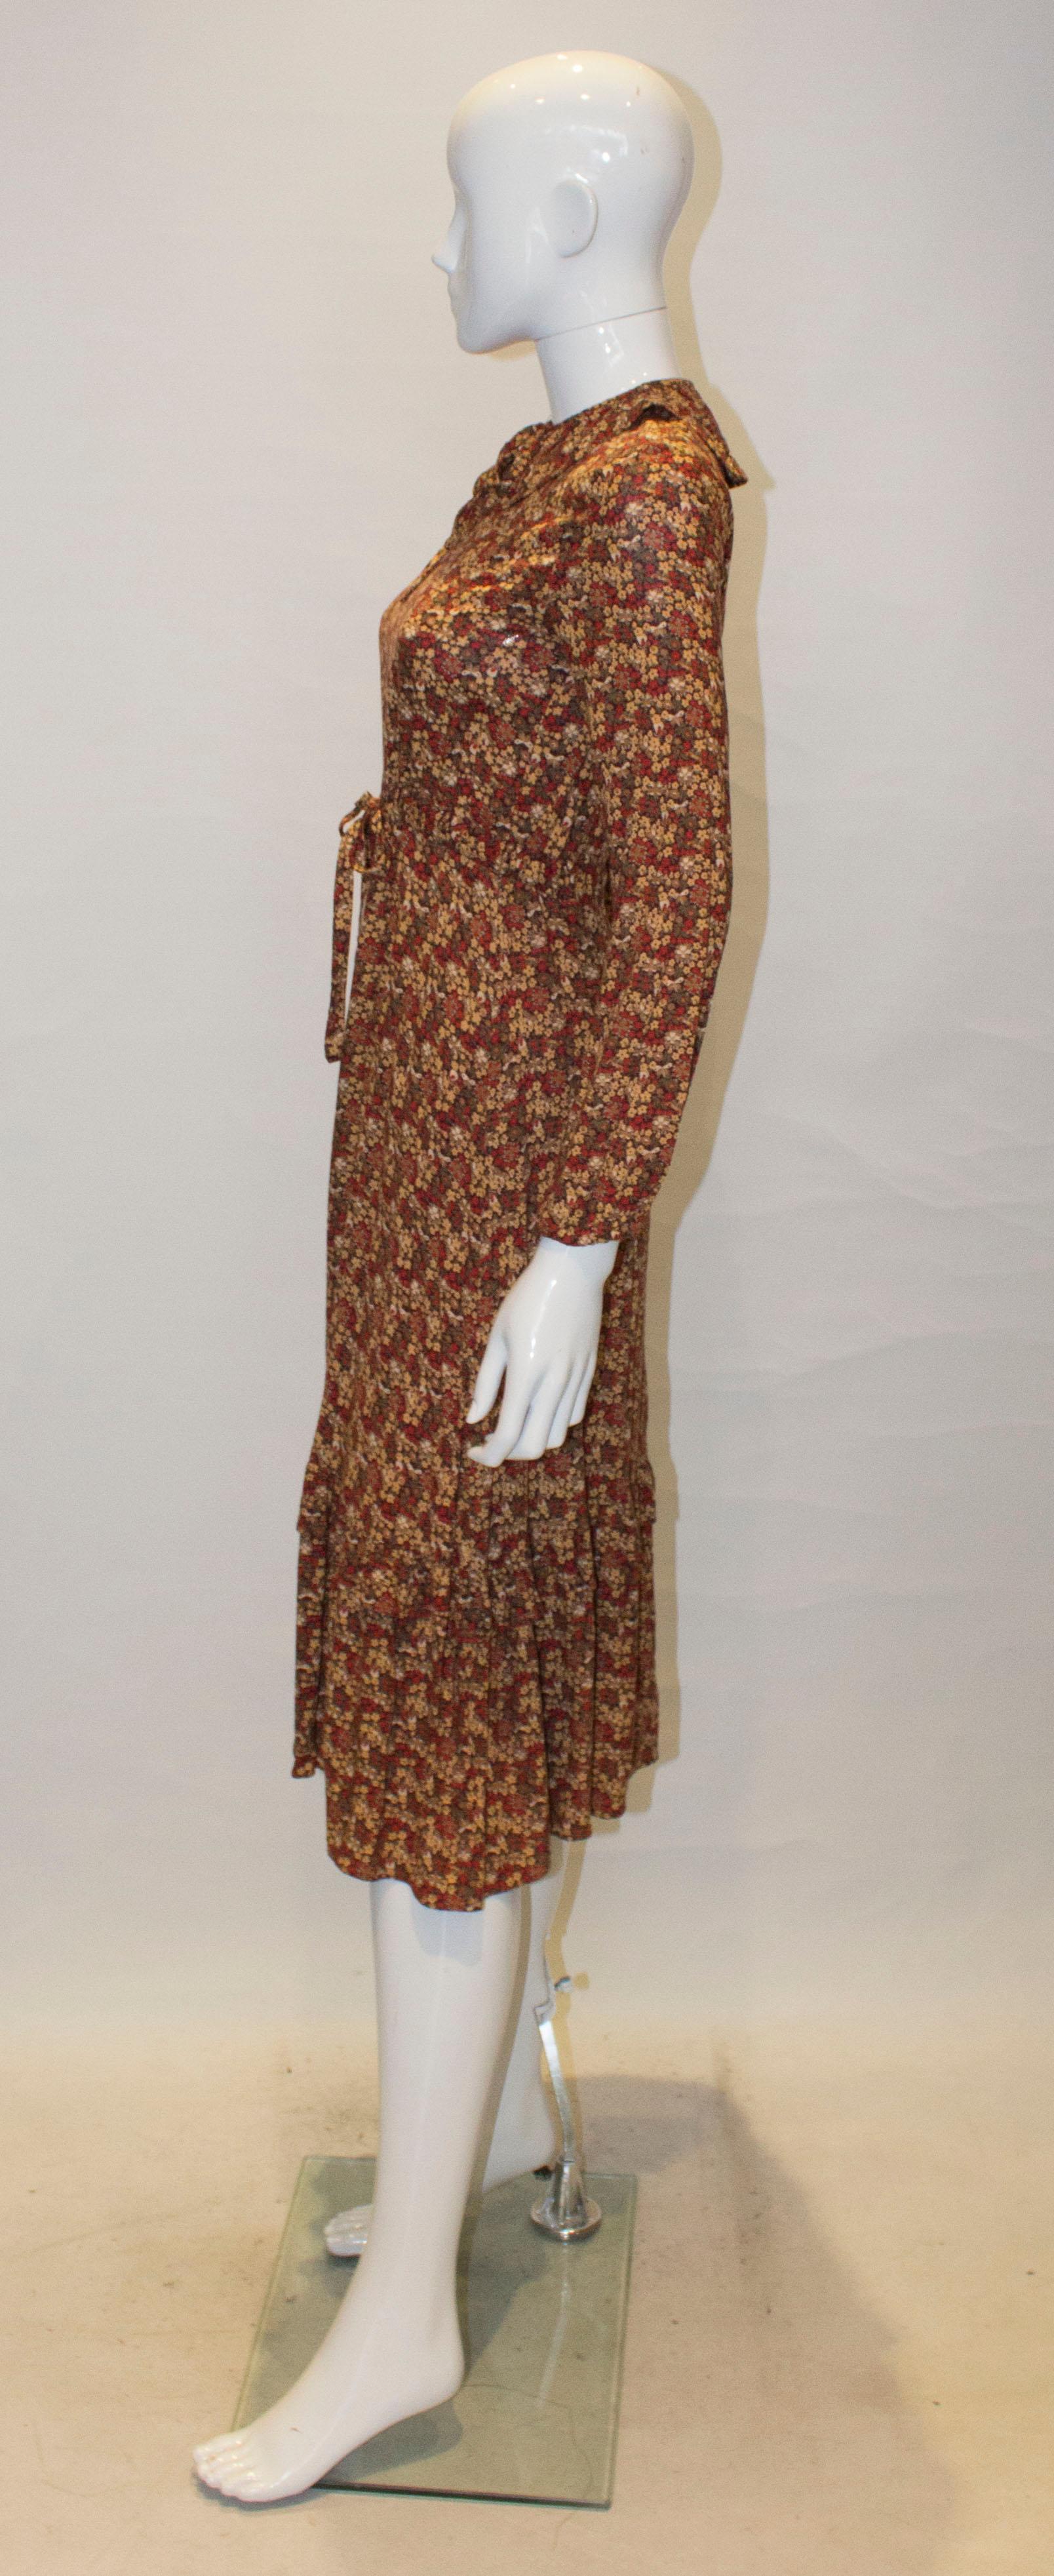 Women's Vintage 1970s Floral Print Dress with Frill Collar For Sale